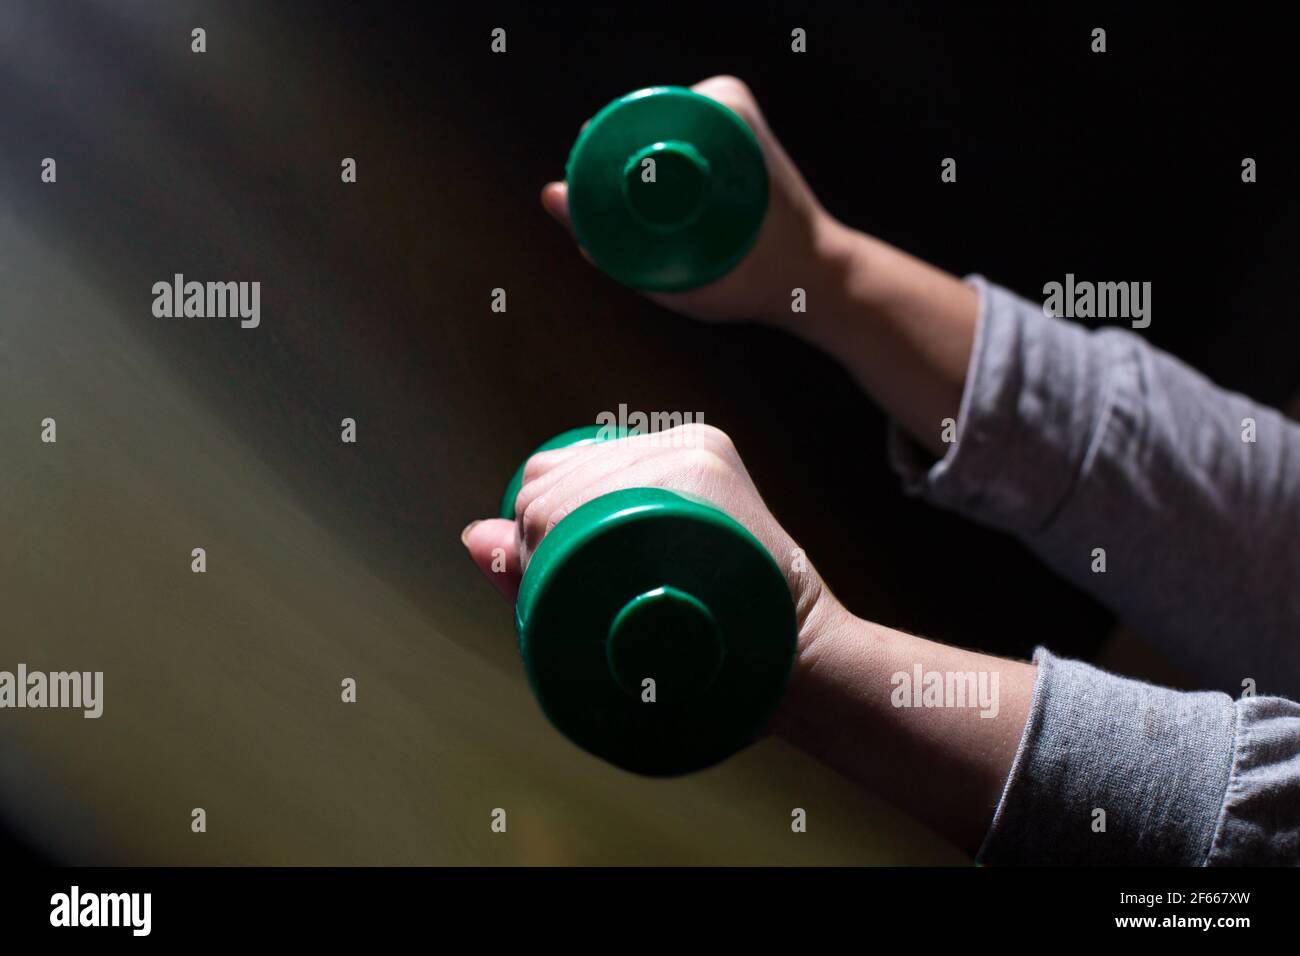 Woman's hands doing exercises with dumbbells on black background with copy space. Stock Photo